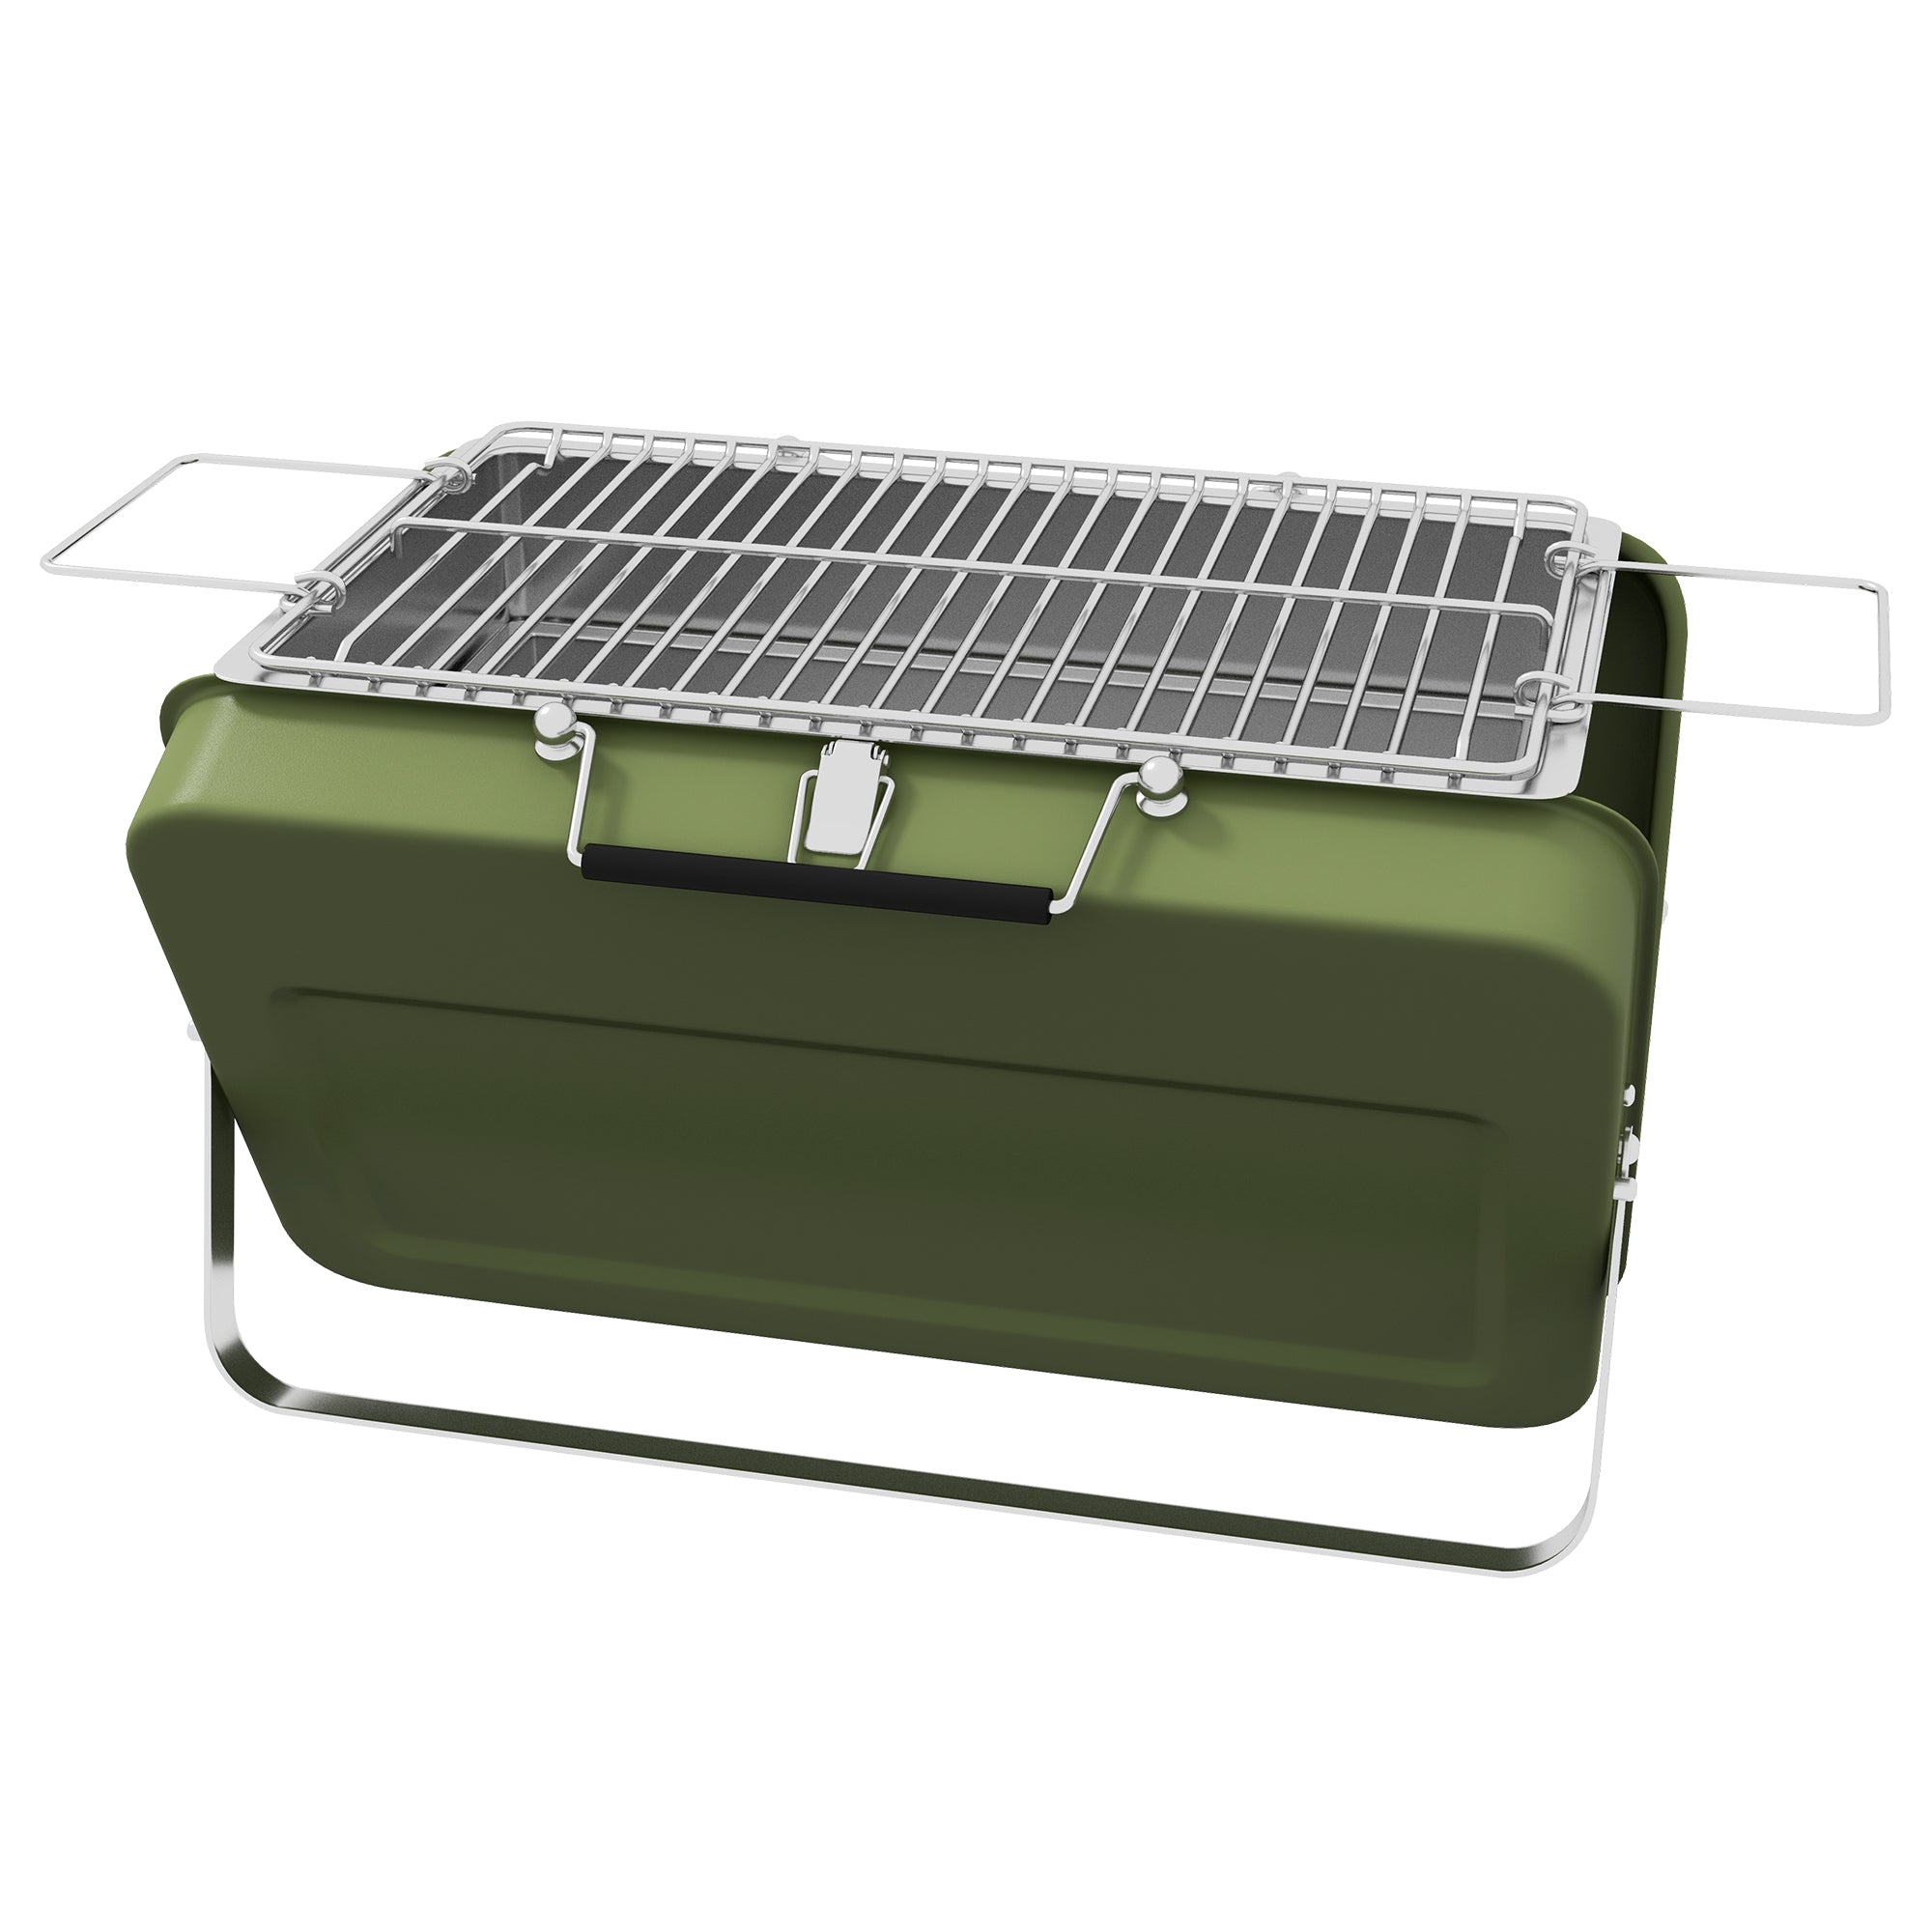 Foldable Suitcase Design Mini Charcoal Barbecue Grill BBQ, Green-0